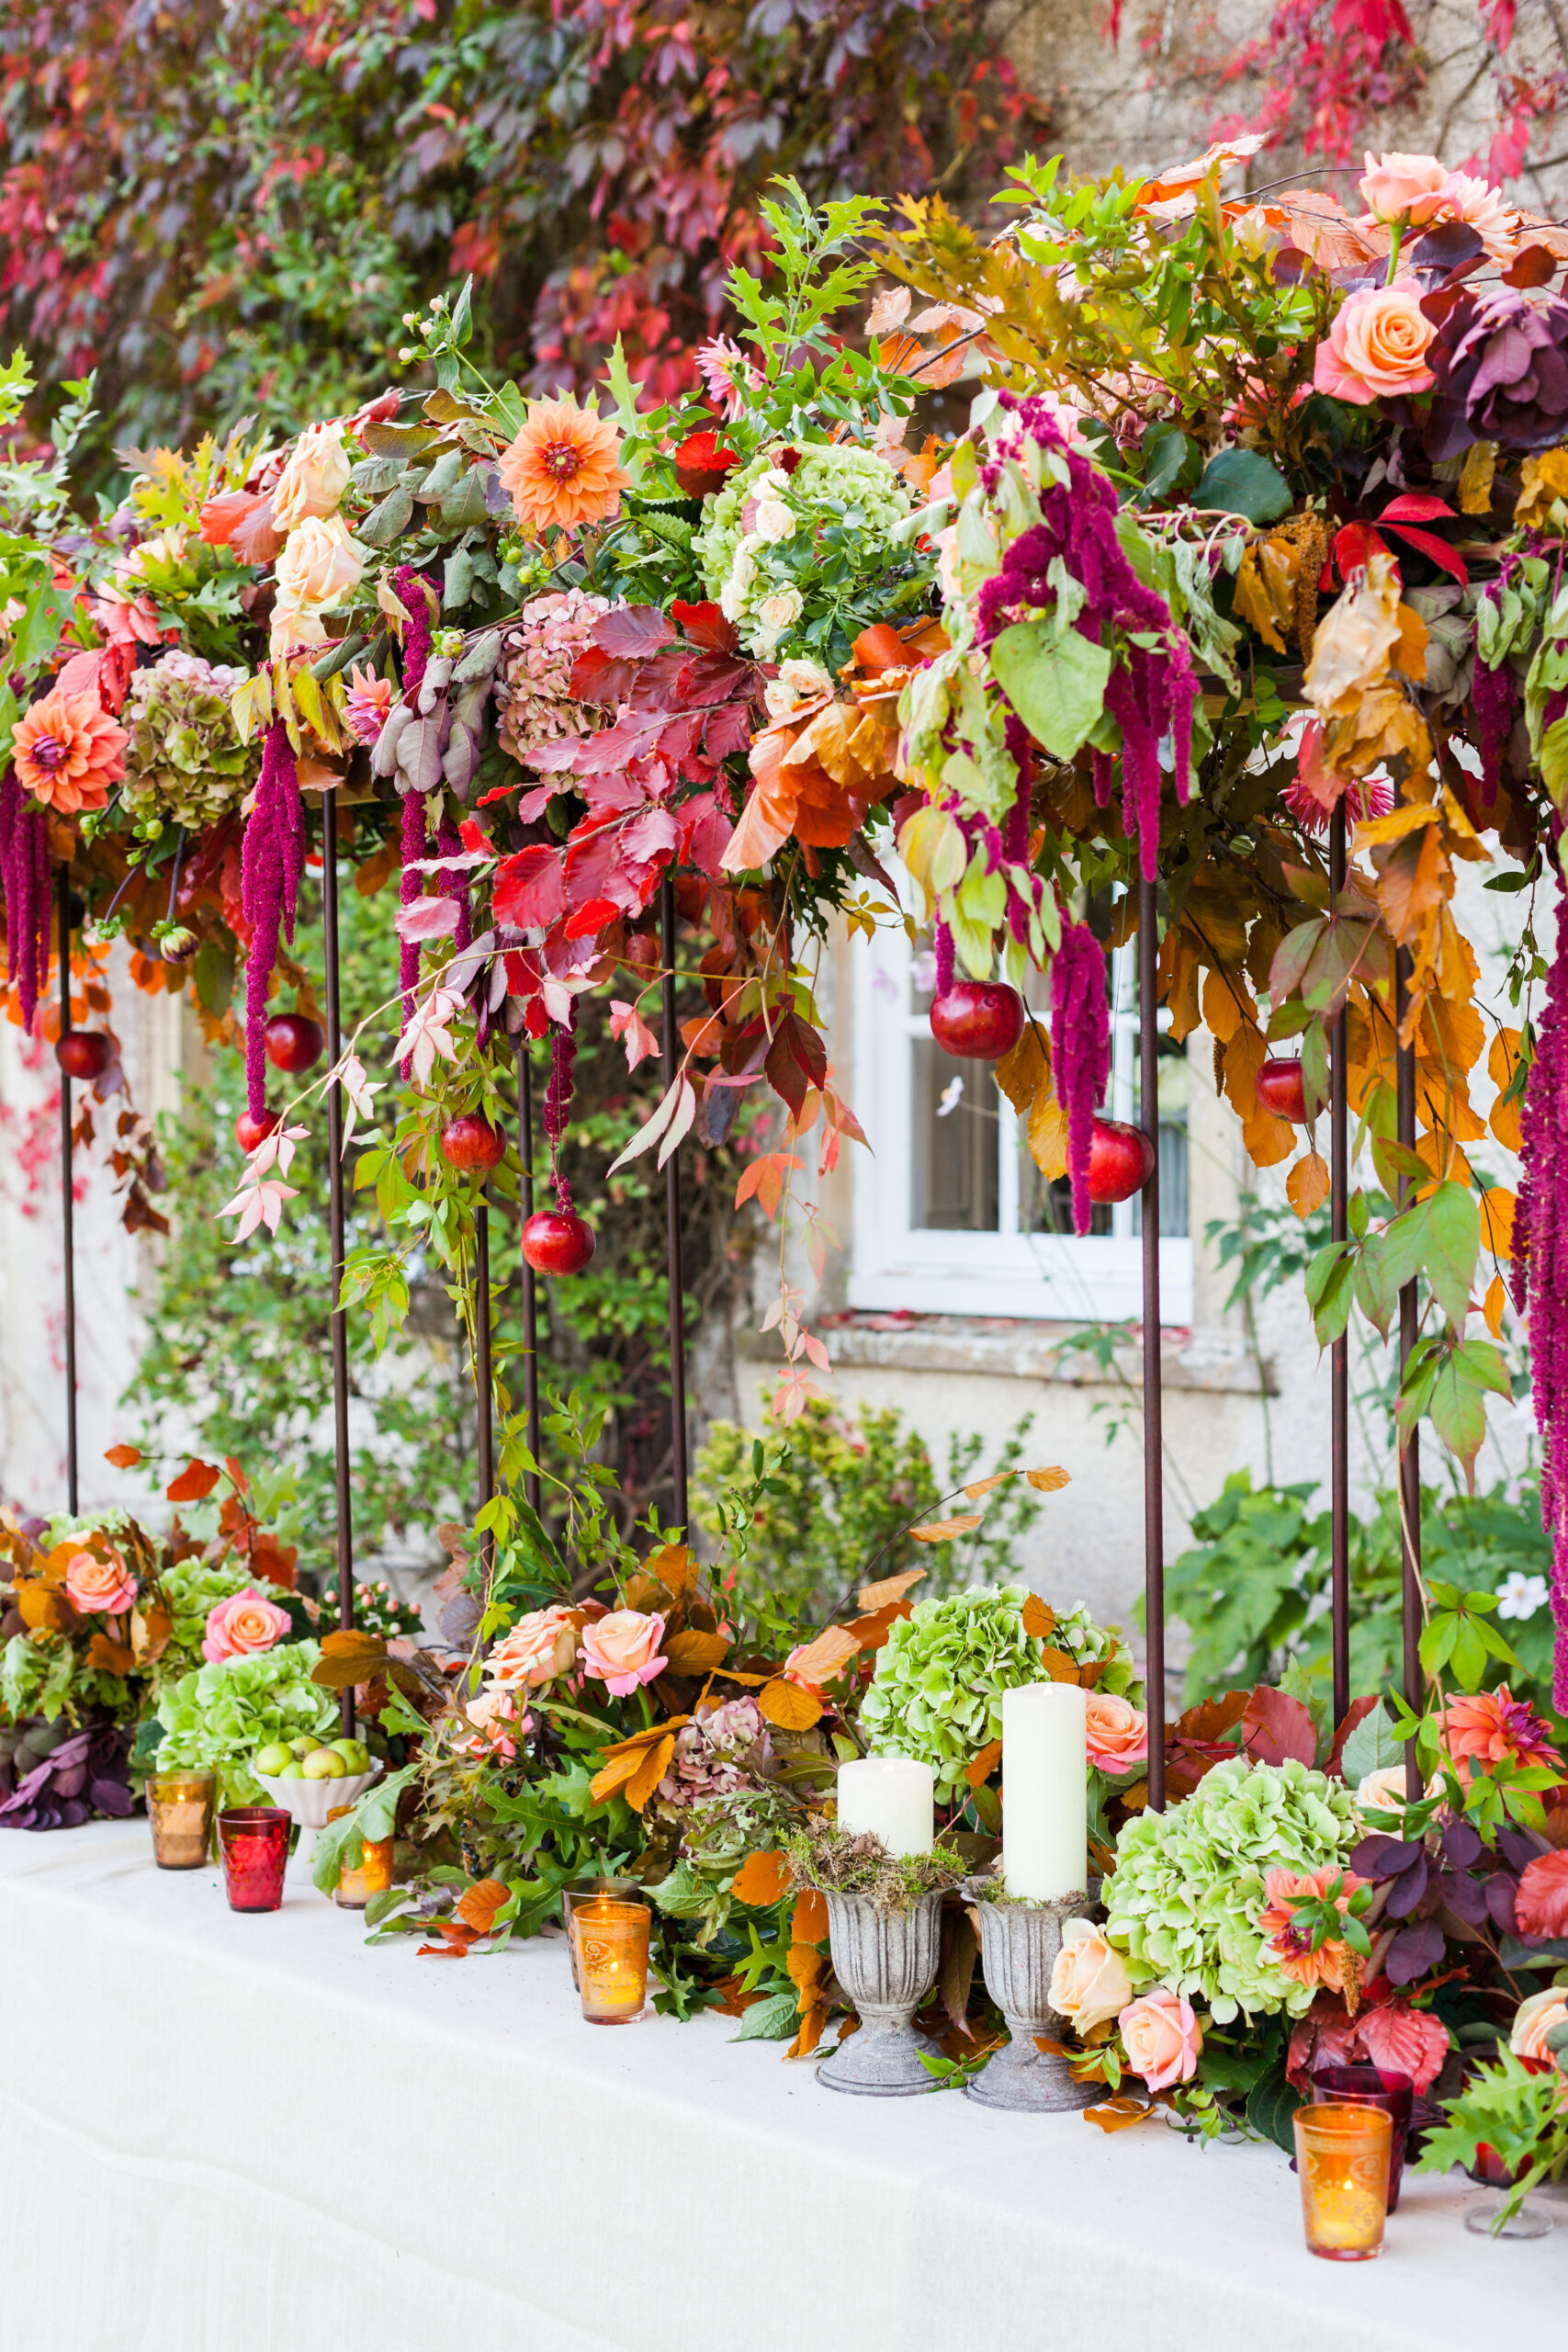 Gathered Style, Darker Pastels, Floral Canopy - Bloom Room Studio LTD - Autumnal Canopy - Photo Credit Katie Spicer